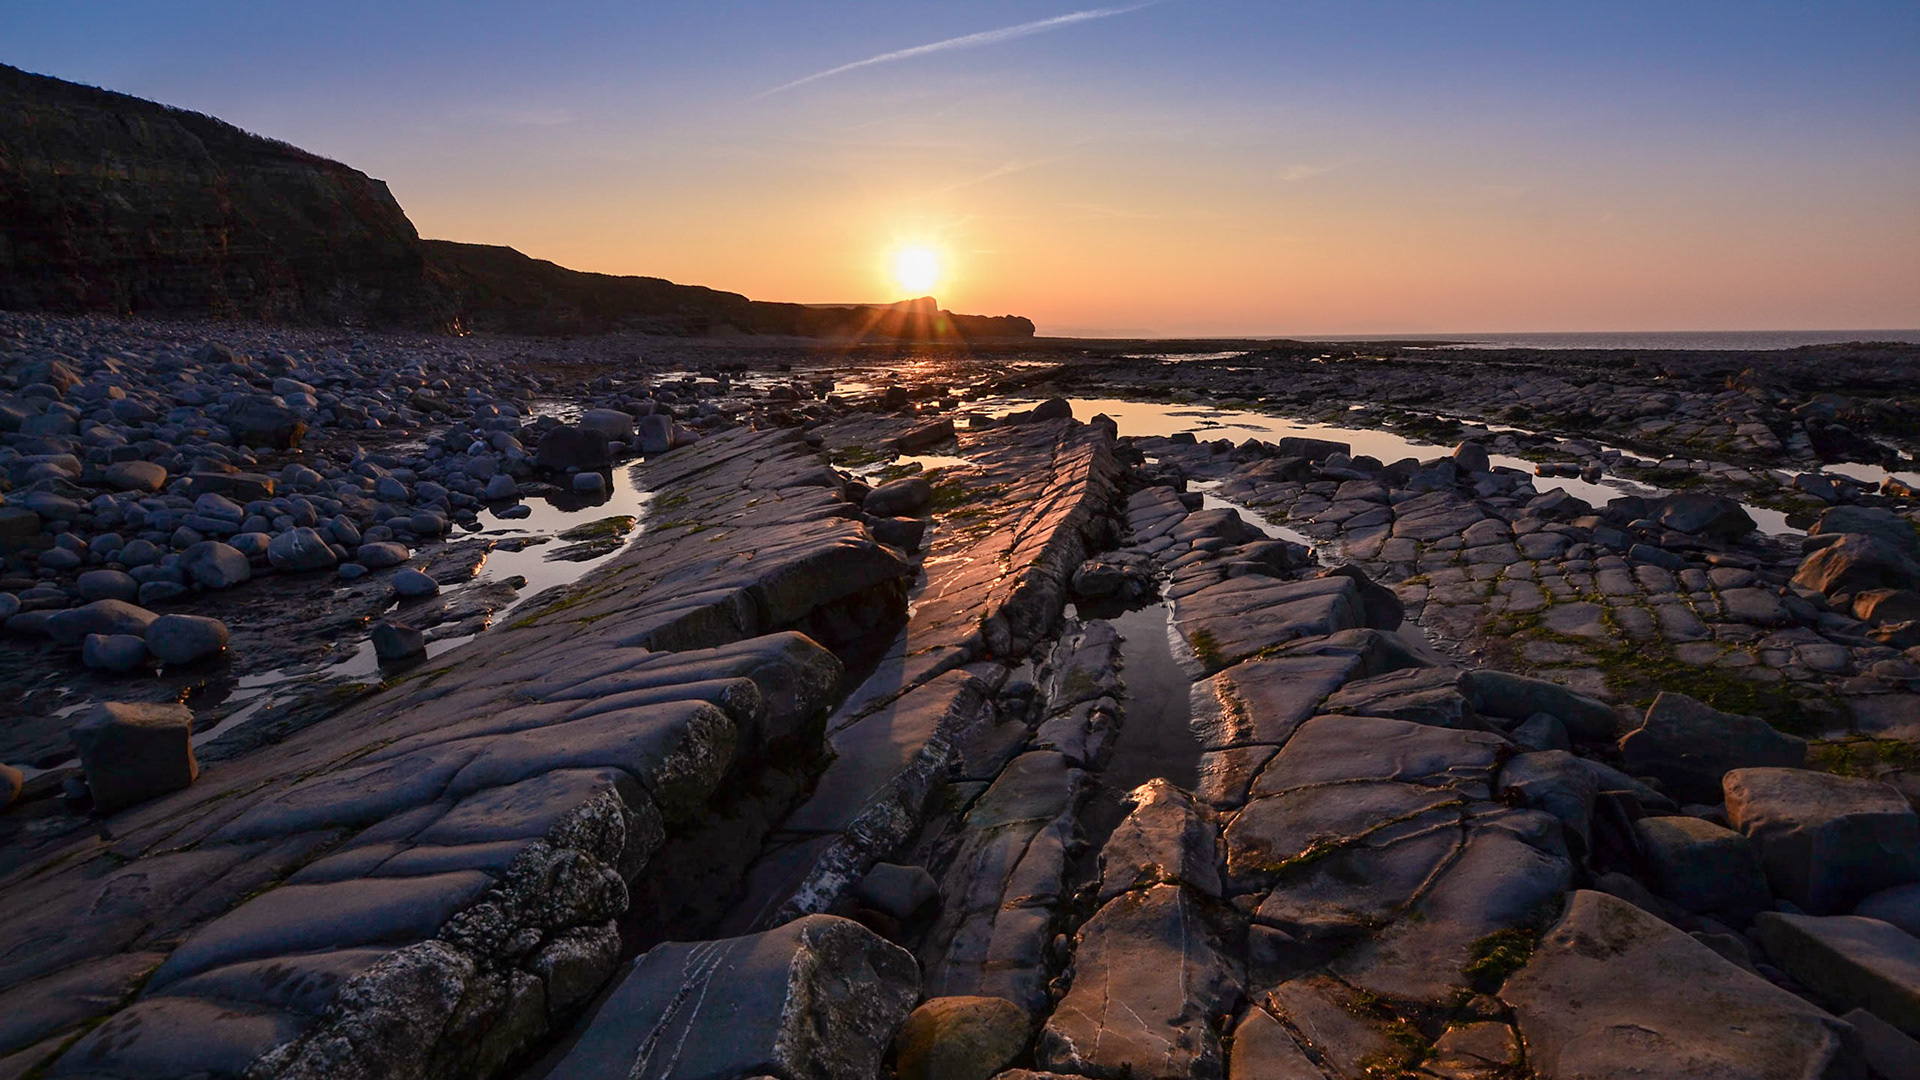 Sunset over a rocky beach at low tide in West Somerset